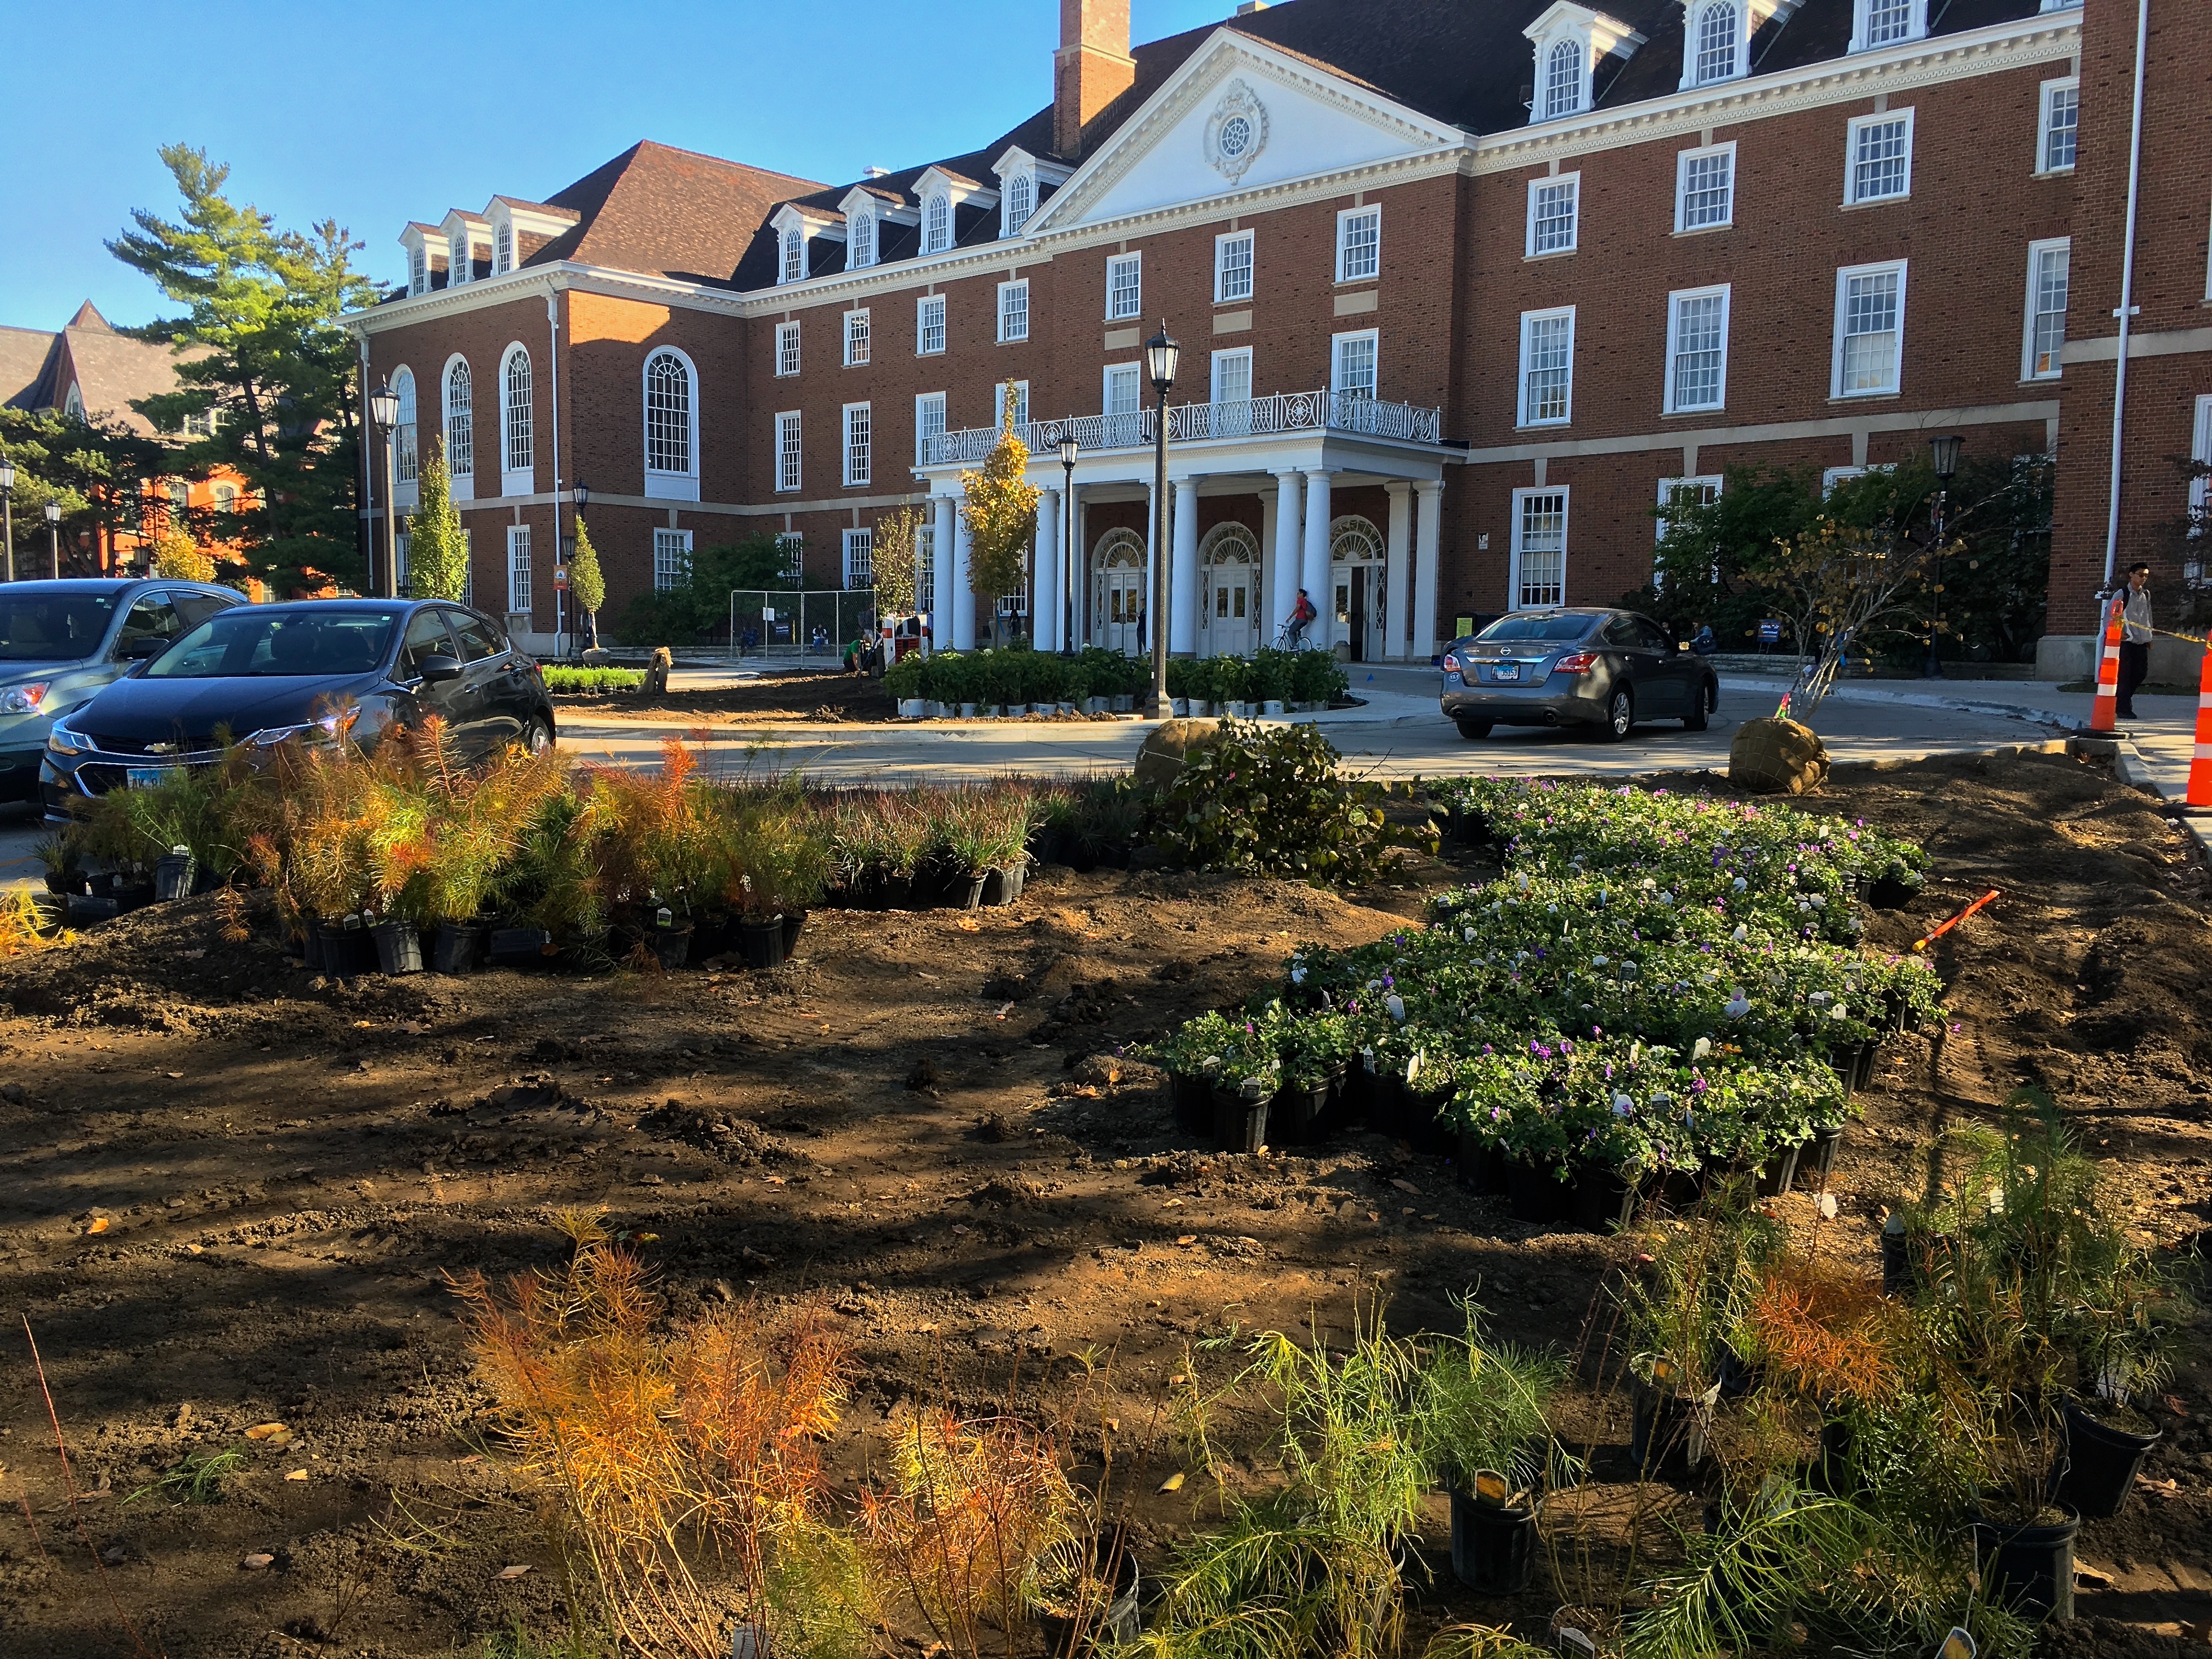 Plants are added to the new landscaping in front of the Union.